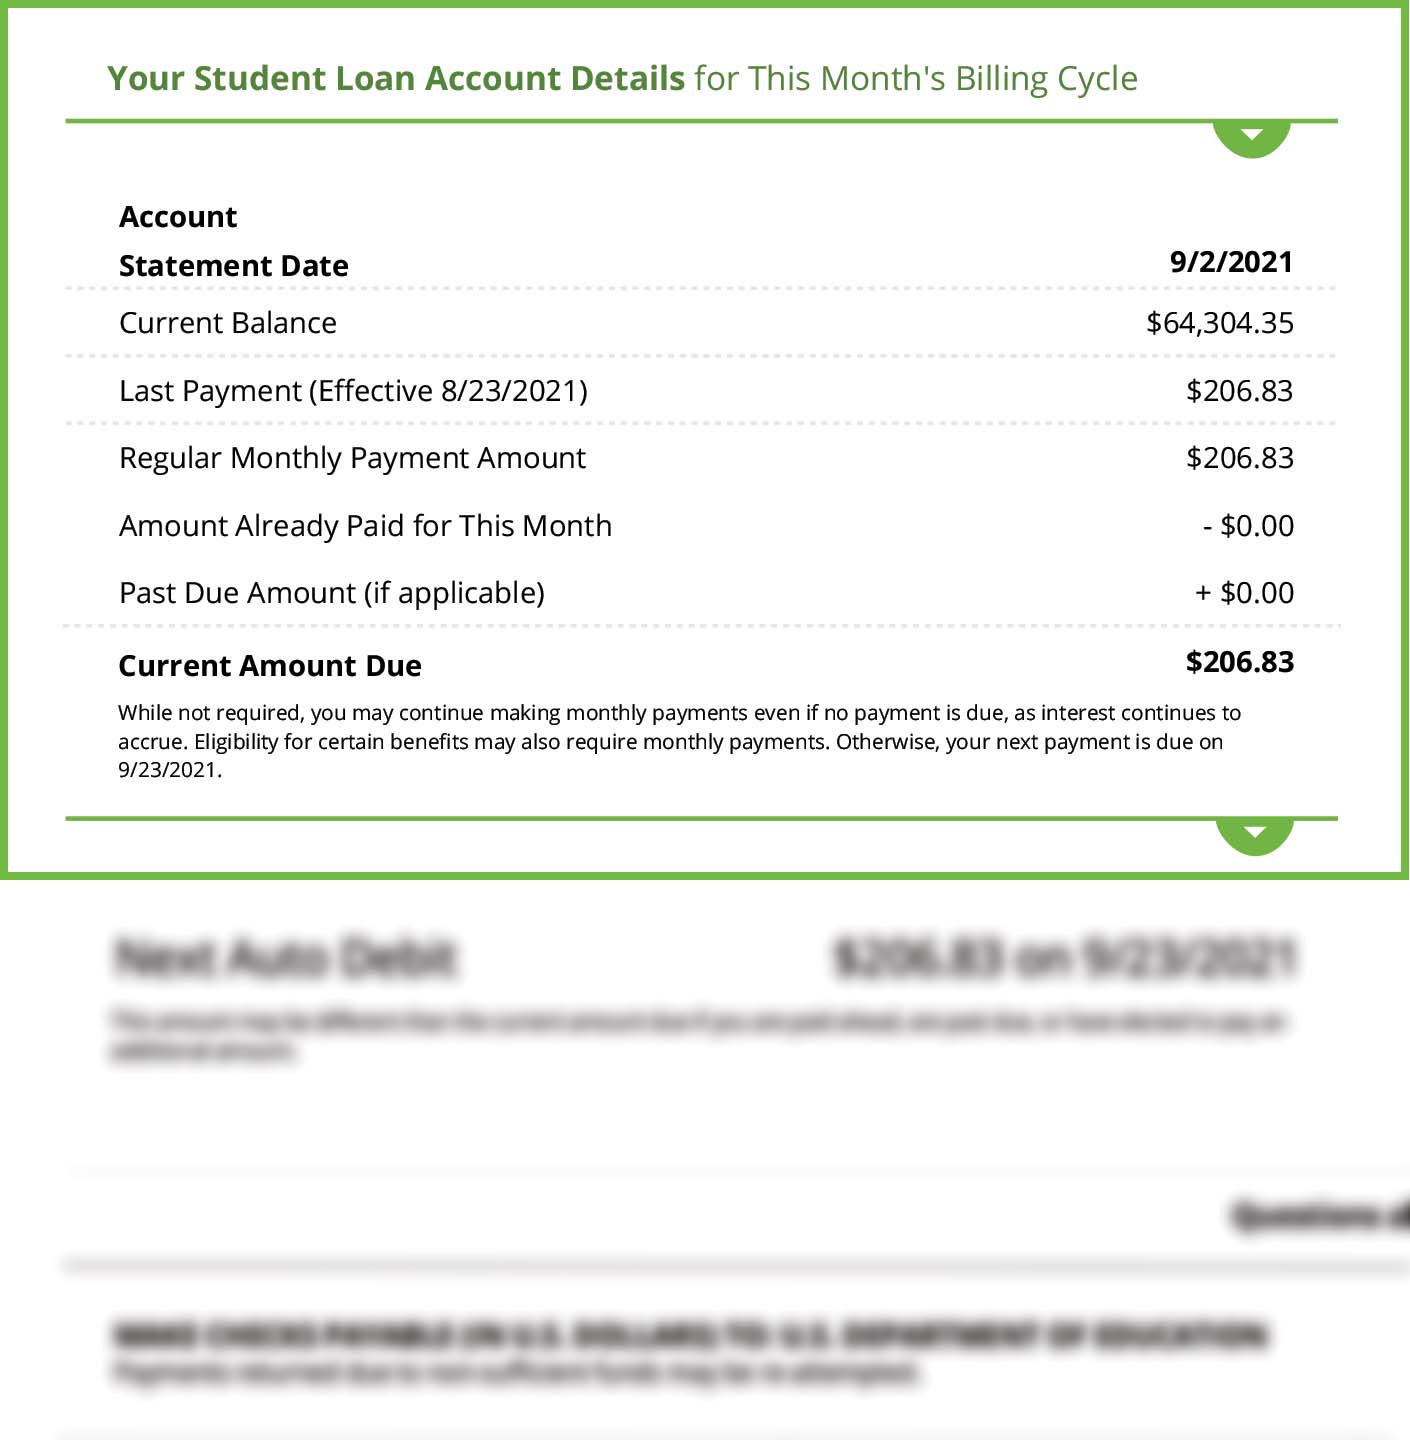 Showing a screenshot of the loan account details section on an example statement. Heading of 'Your Student Loan Account Details for This Month's Billing Cycle' is displayed with account information deisplayed below in a two column layout.